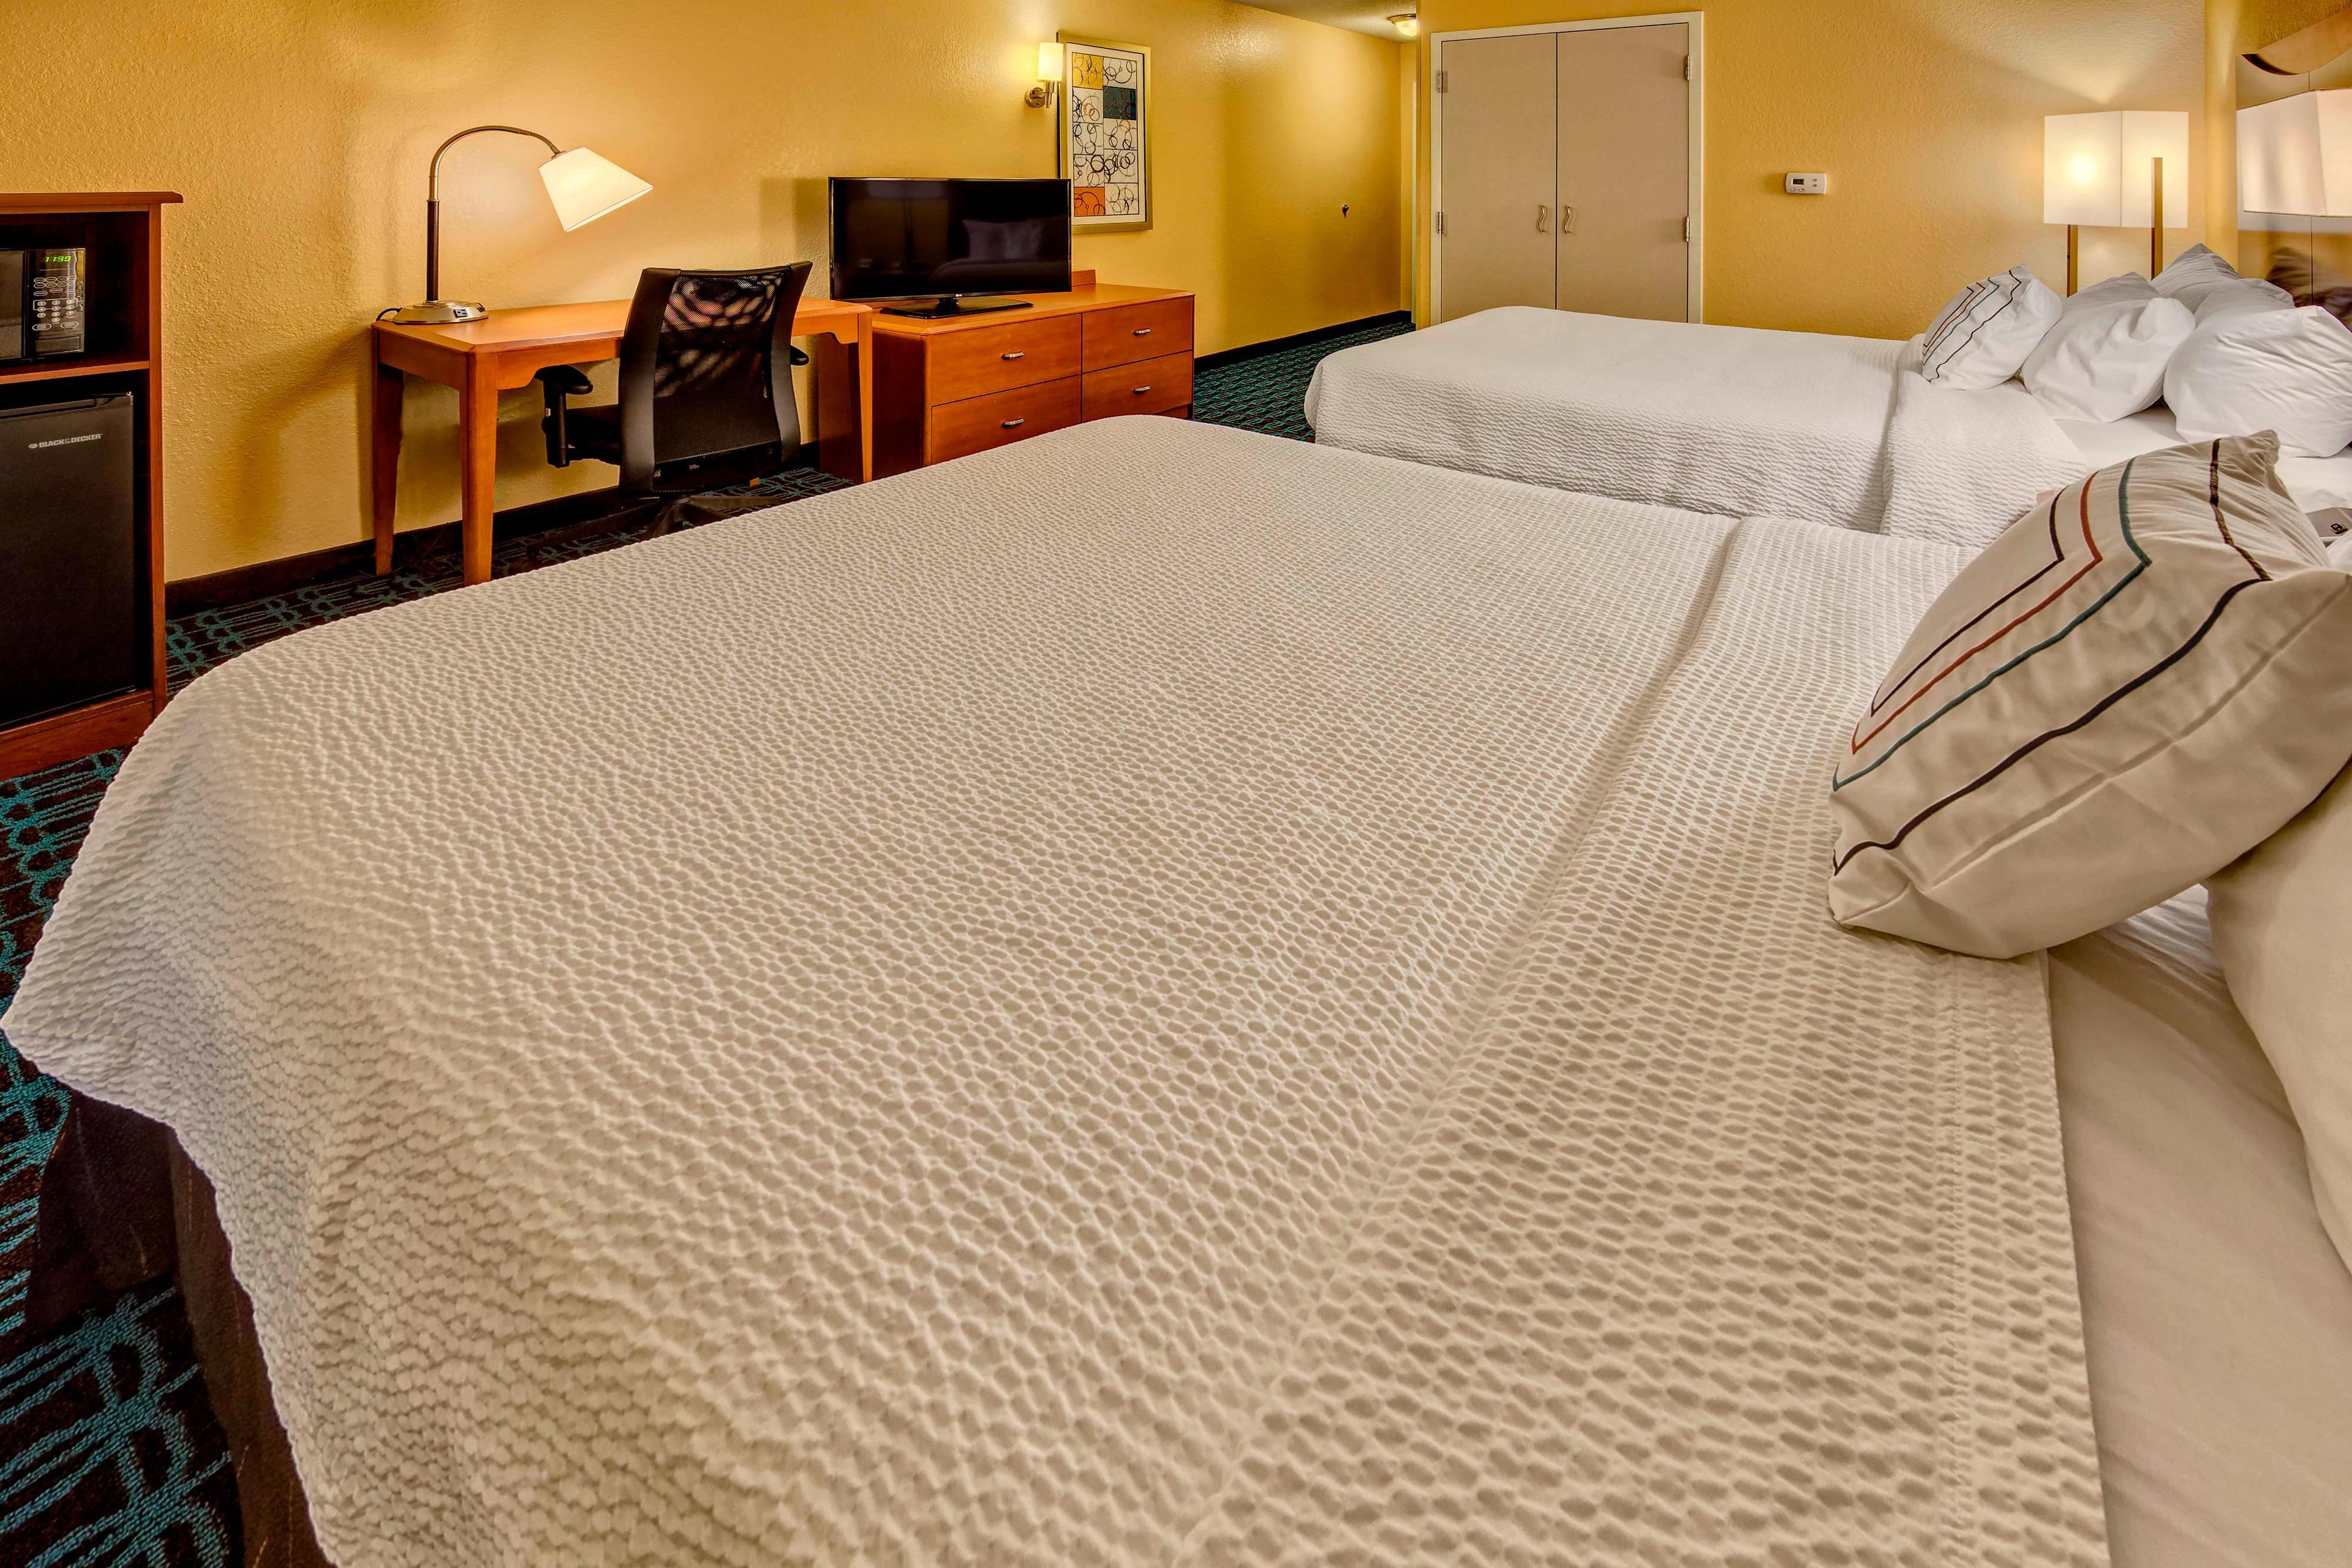 Two queen beds fitted with pristine linens and plush bedding make our spacious guest rooms the perfect home away from home. Enjoy complimentary high-speed Wi-Fi and Smart TV with access to Netflix, Pandora and Youtube.